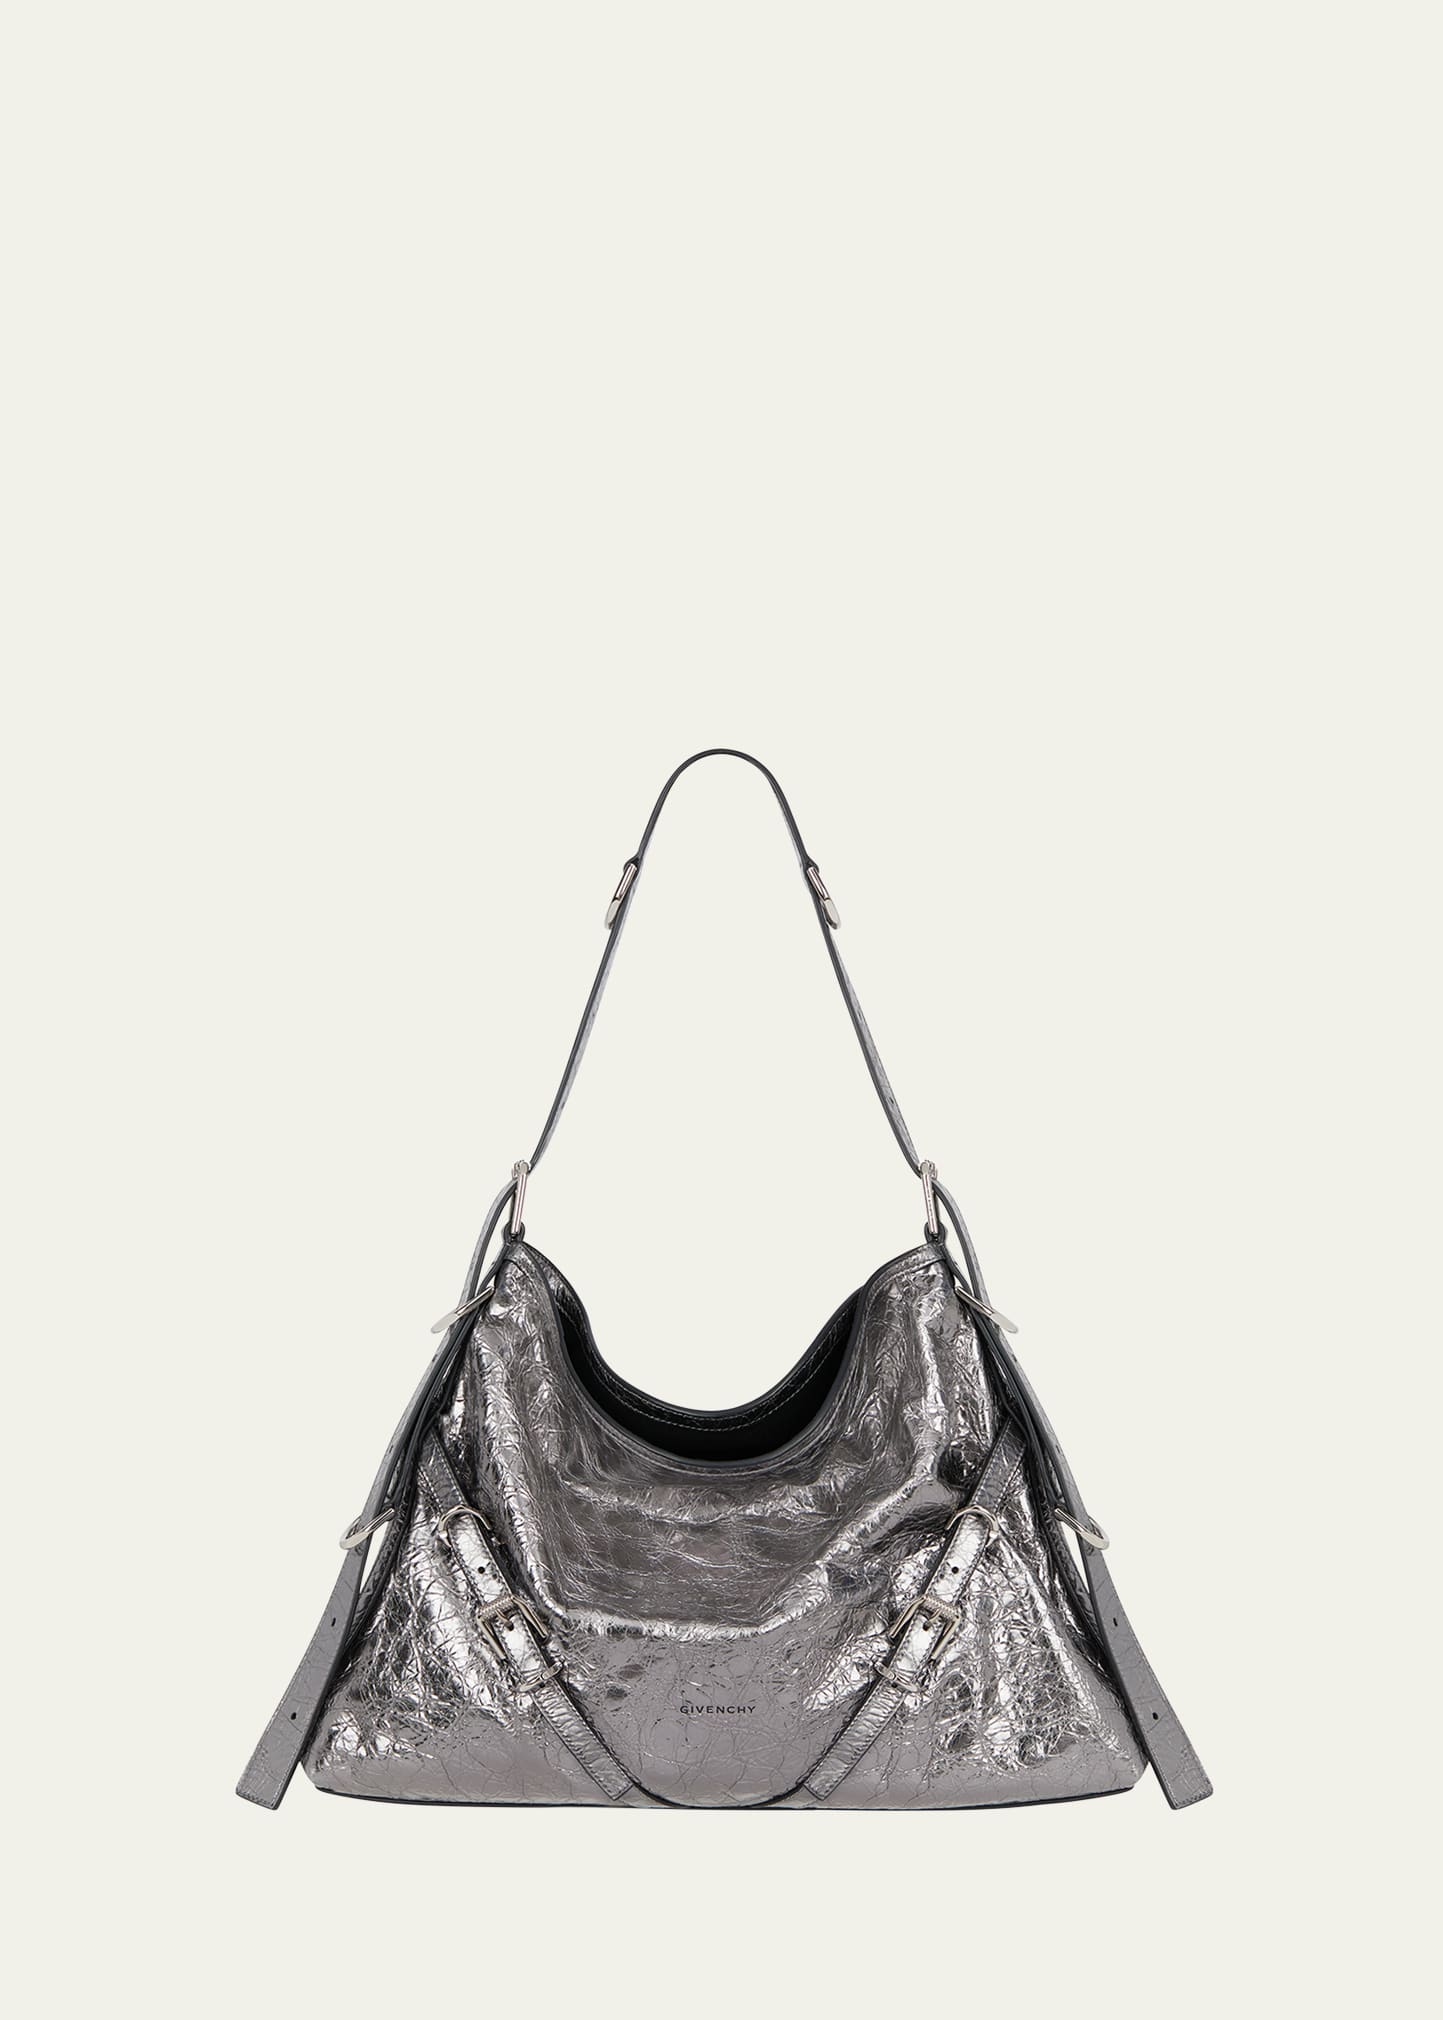 Givenchy Voyou Medium Metallic Leather Shoulder Bag In Silver